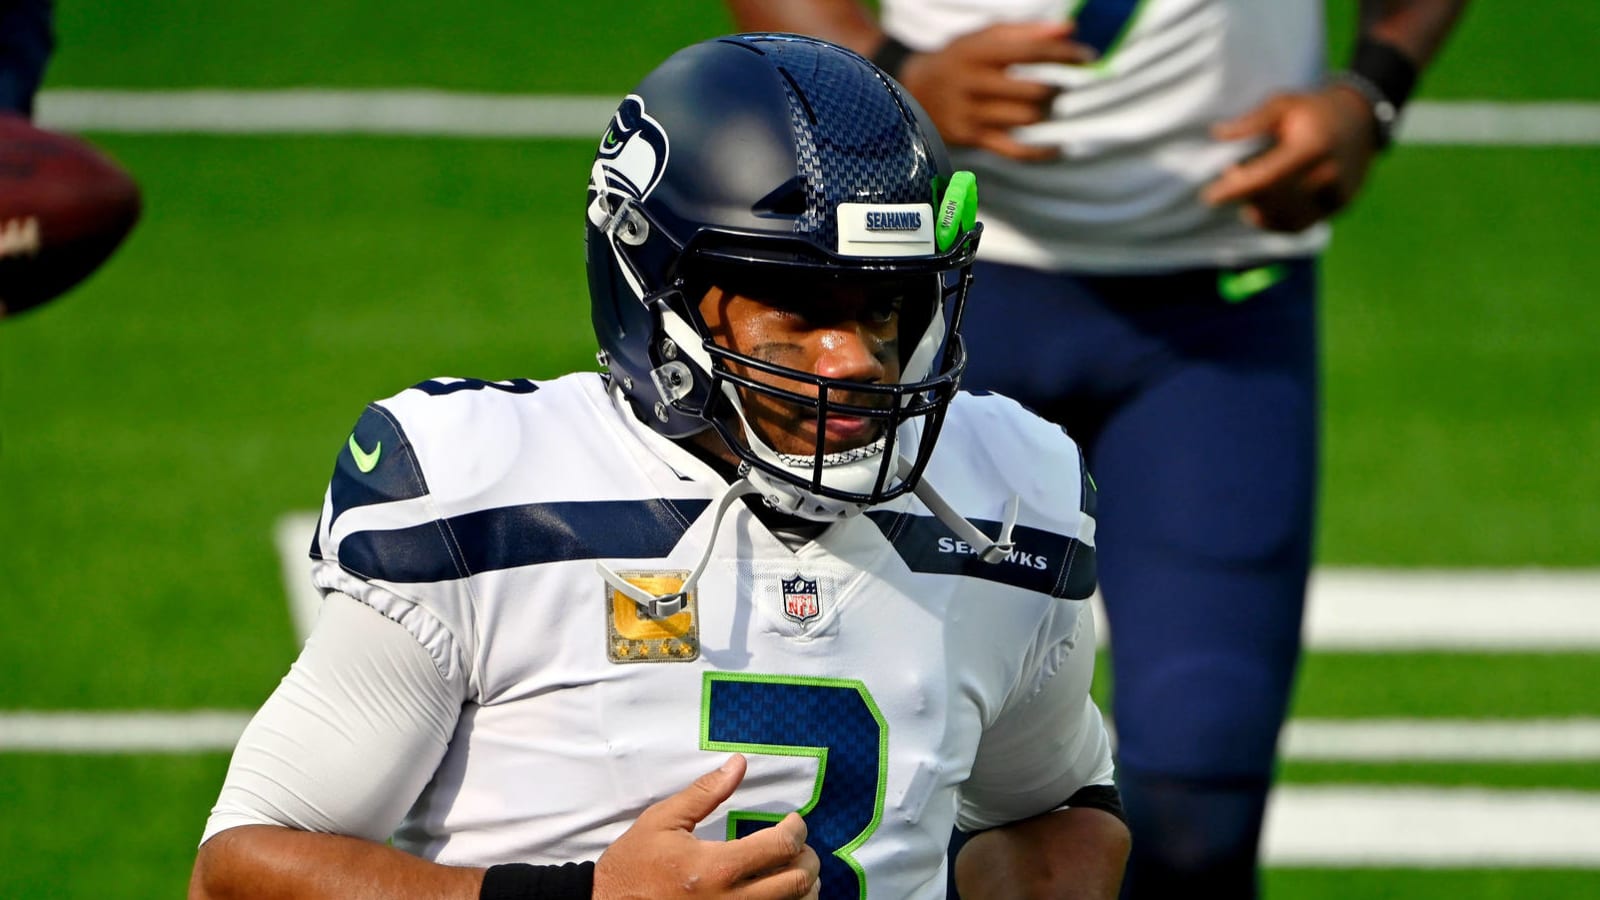 NFL exec: Seahawks not sold on Wilson long term, drama not over